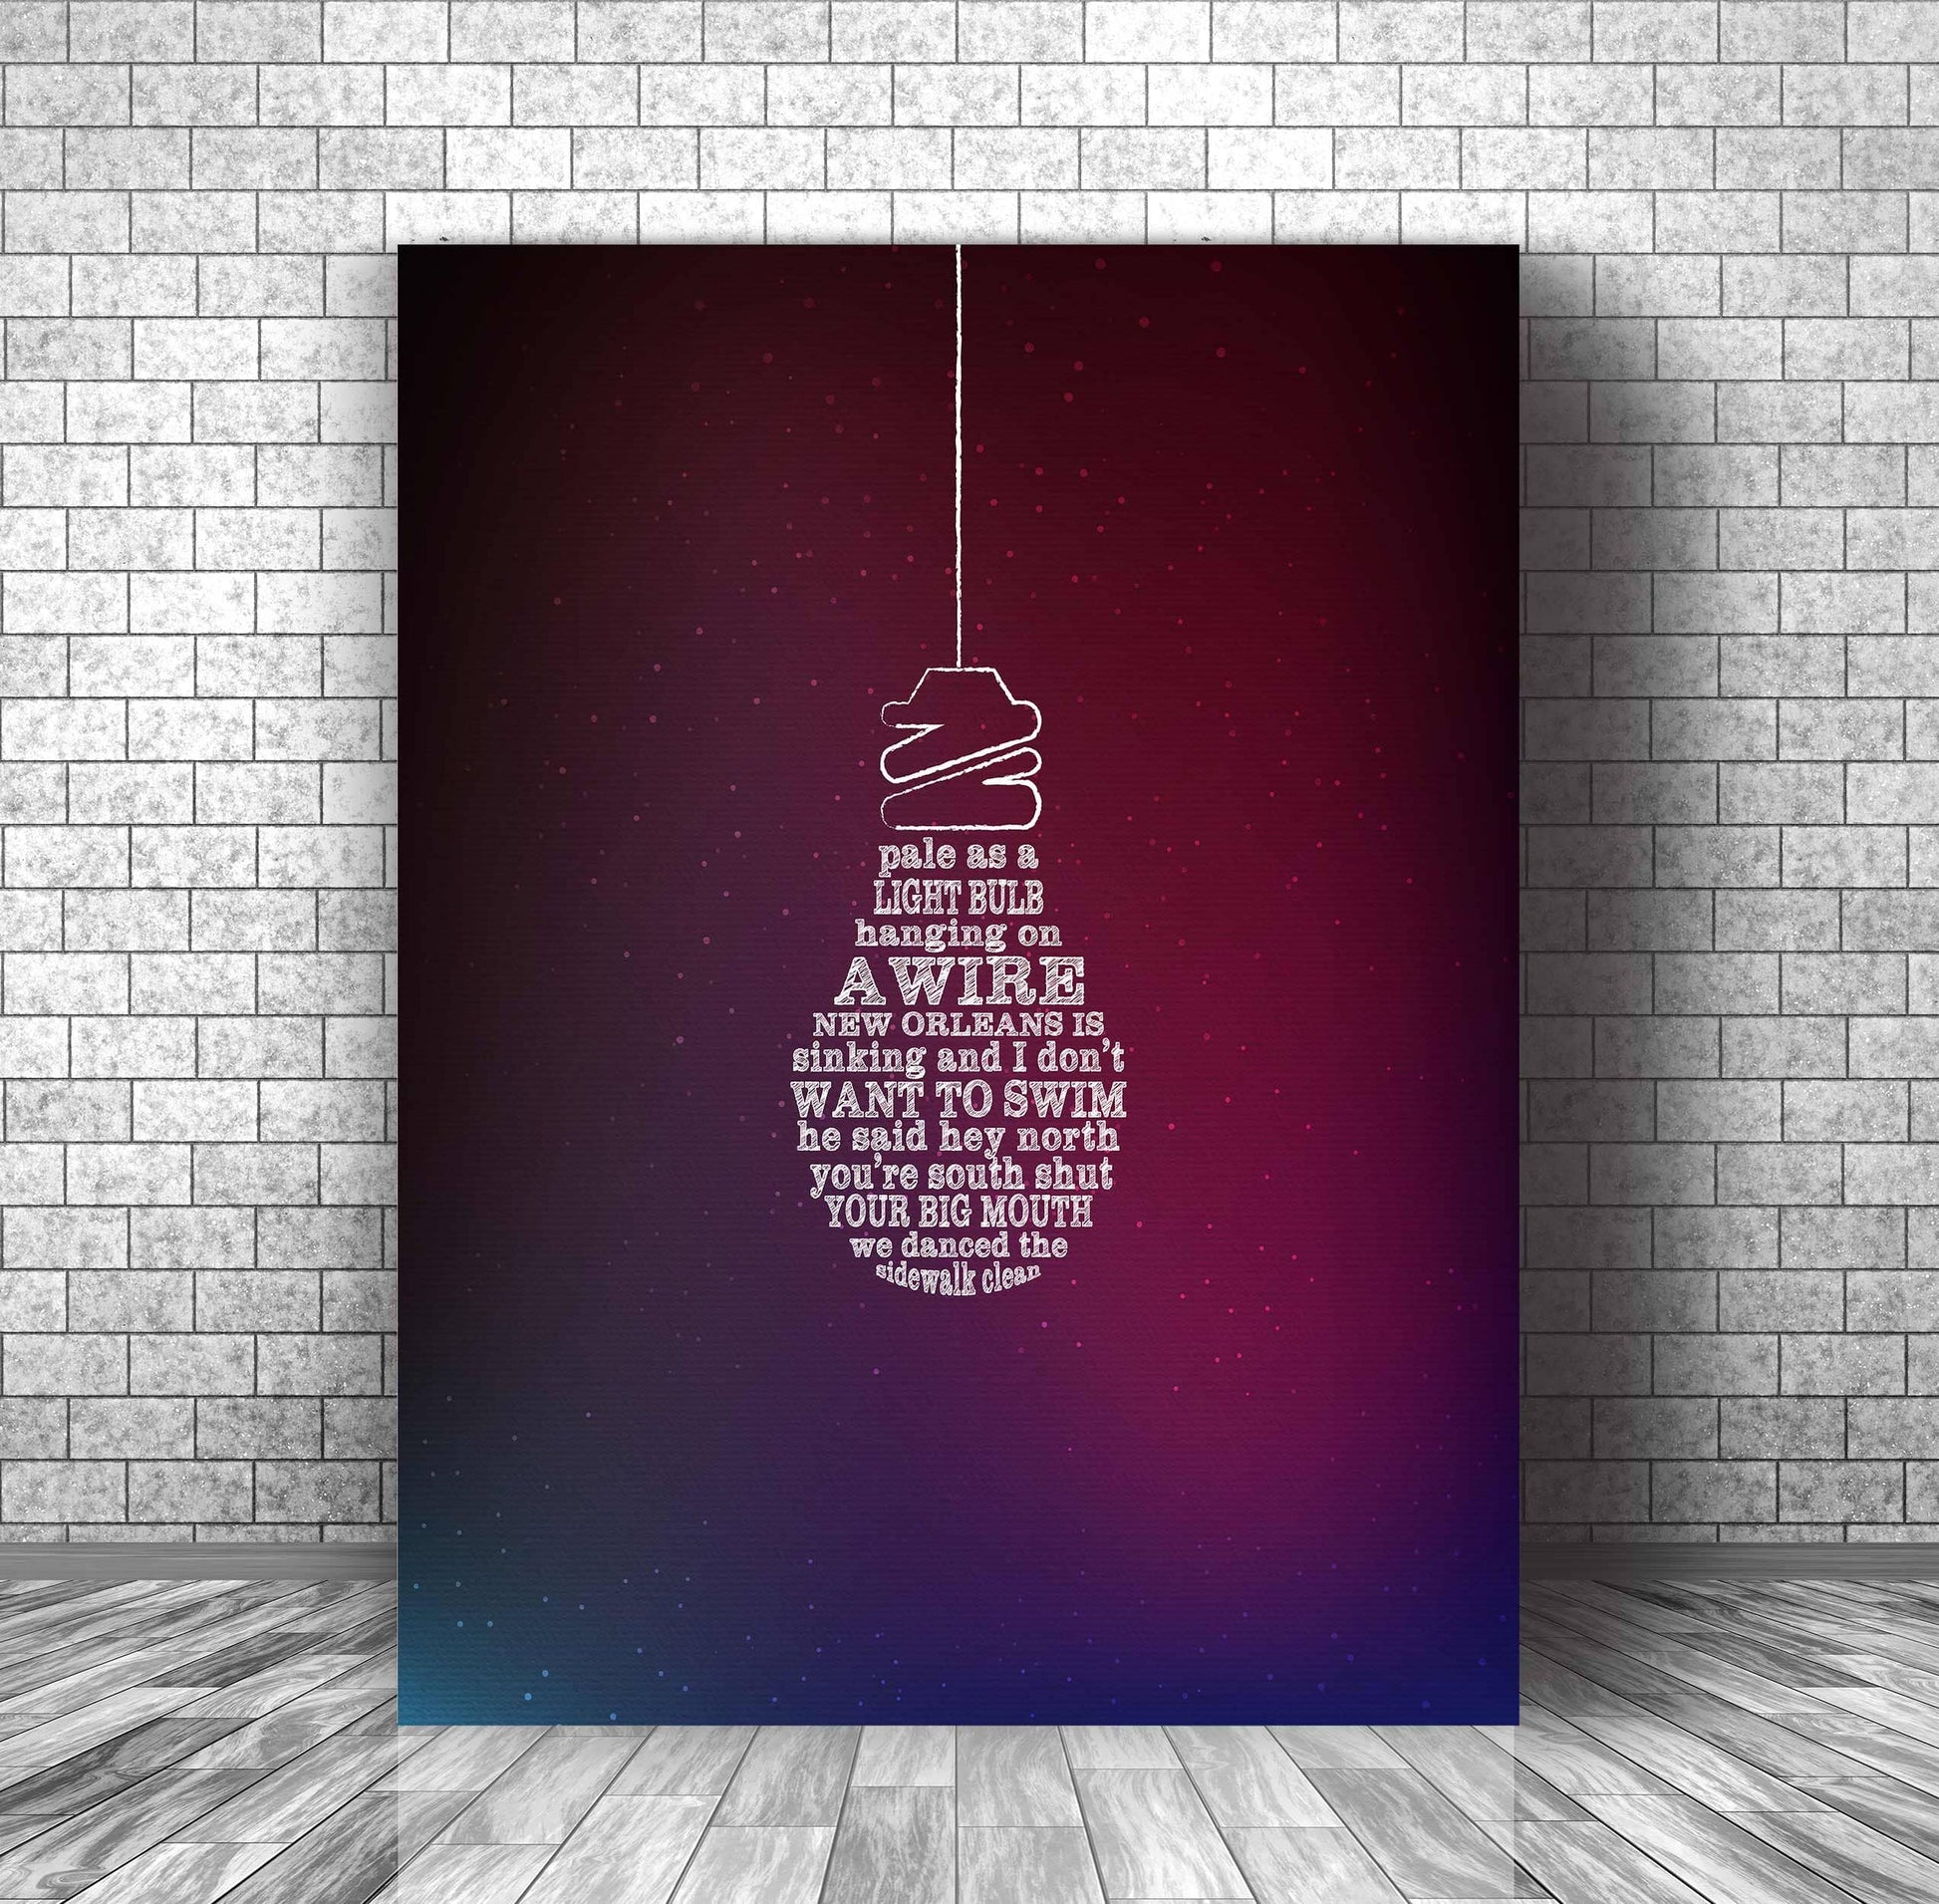 New Orleans is Sinking by Tragically Hip - Song Lyric Print Song Lyrics Art Song Lyrics Art 11x14 Canvas Wrap 